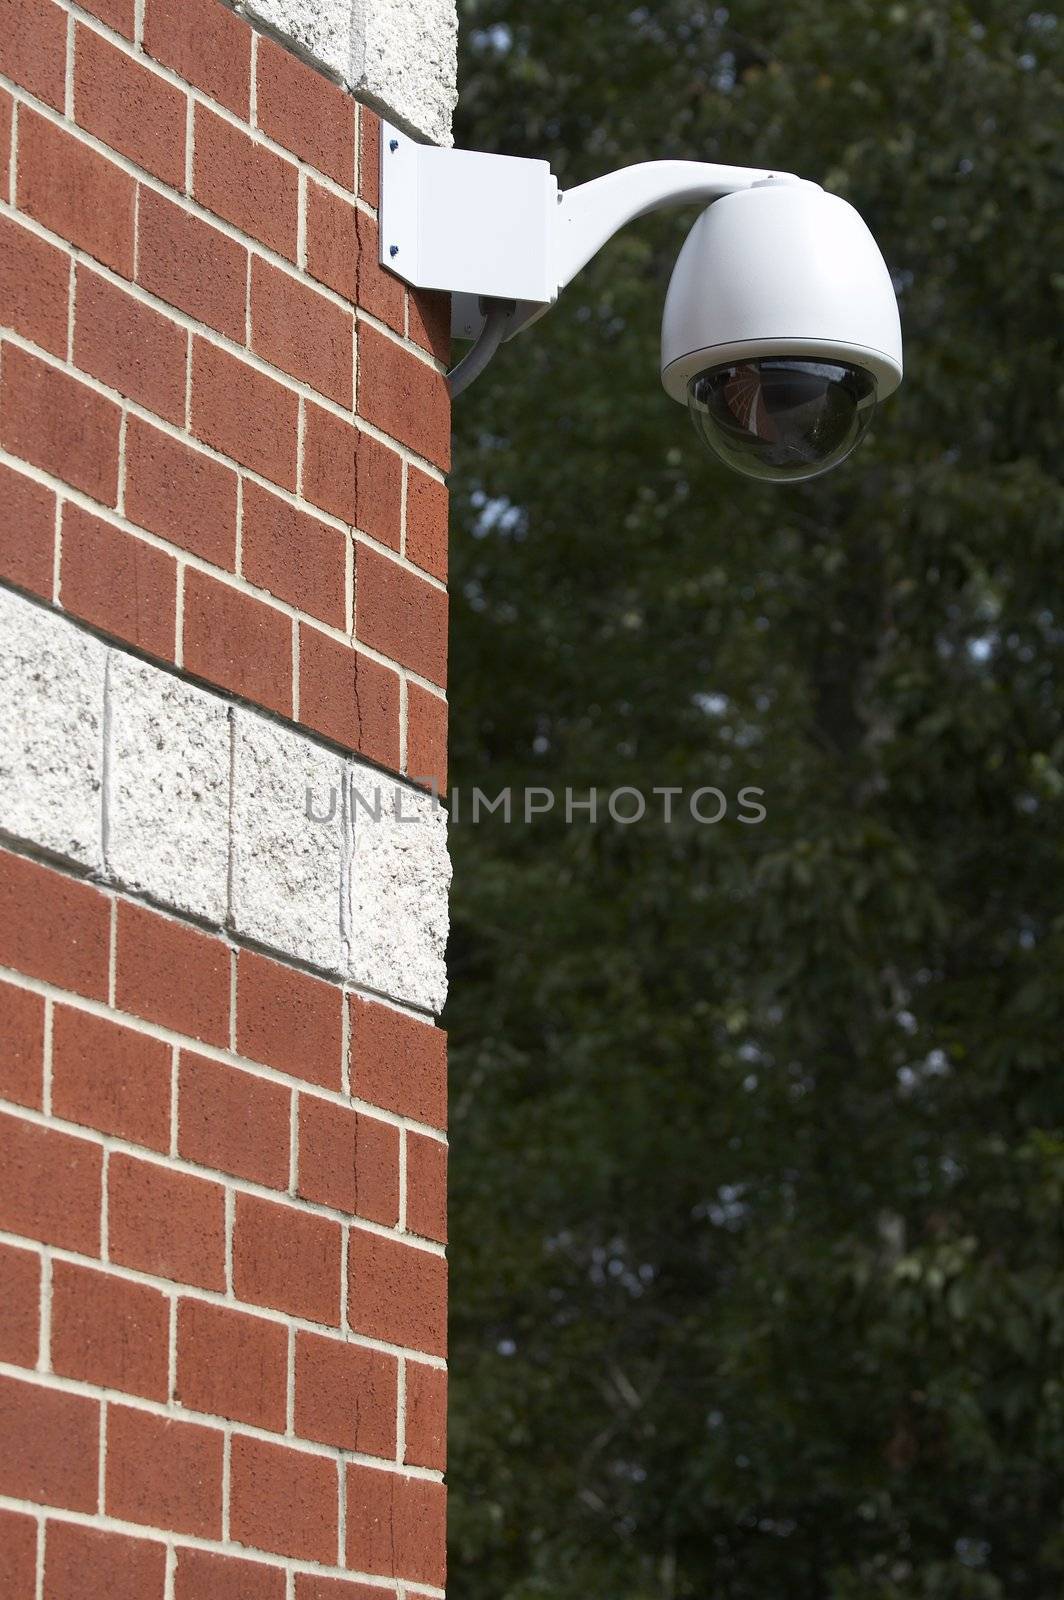 a picture of a surveillance camera on a brick wall